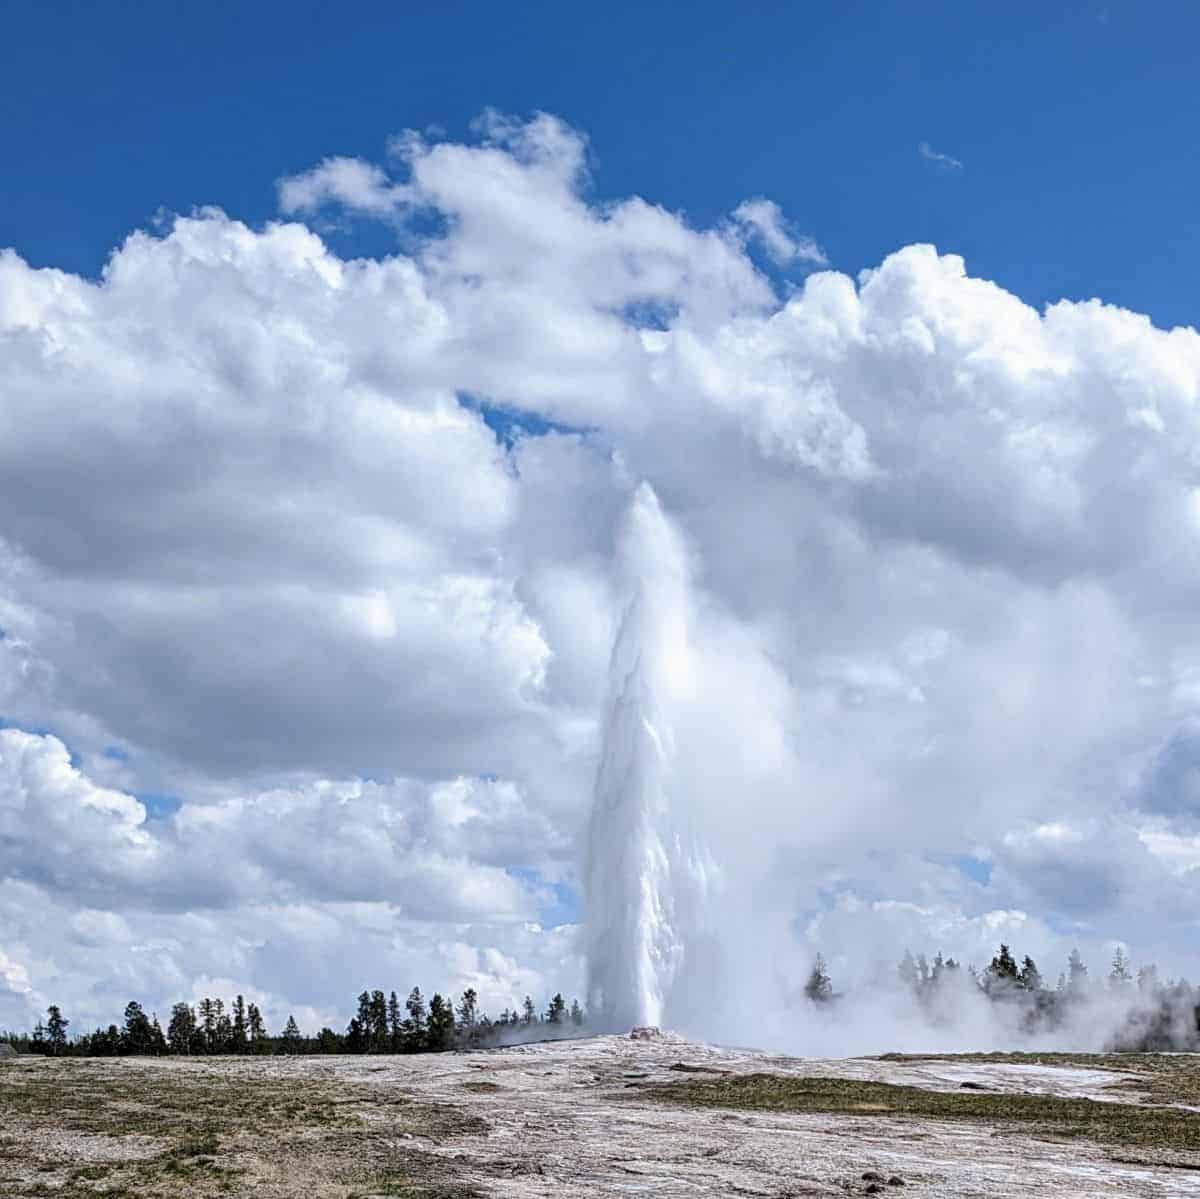 geyser erupting in the middle of a wide expanse like a sandy field